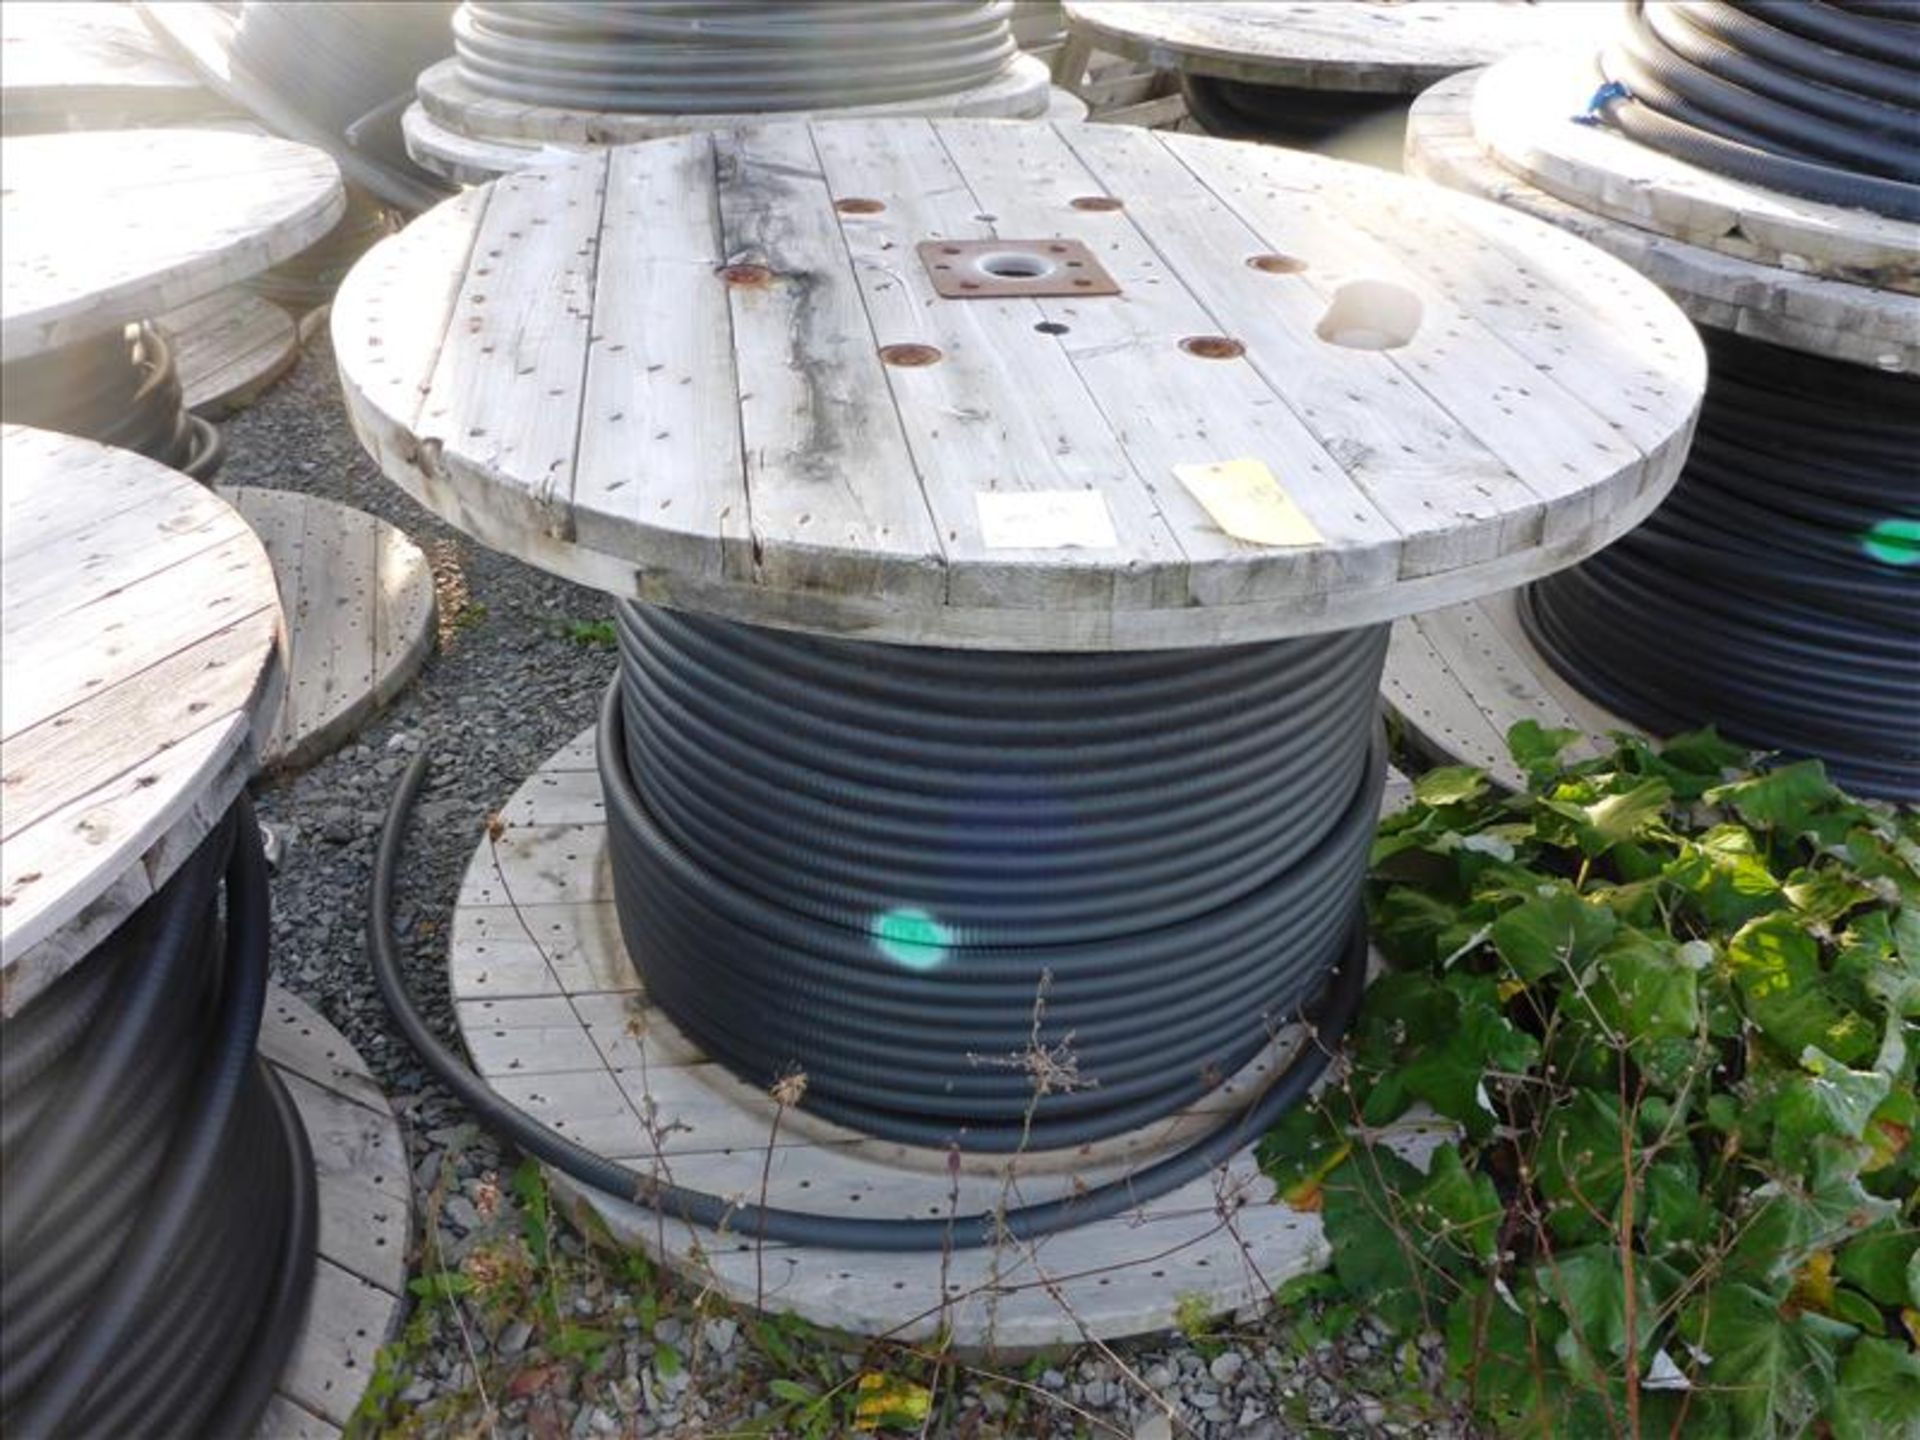 reel of electrical cable, approx. 700 ft., 00791 M -I- Aug/2013 Nexans Firex - II 14 AWG/30C Teck 90